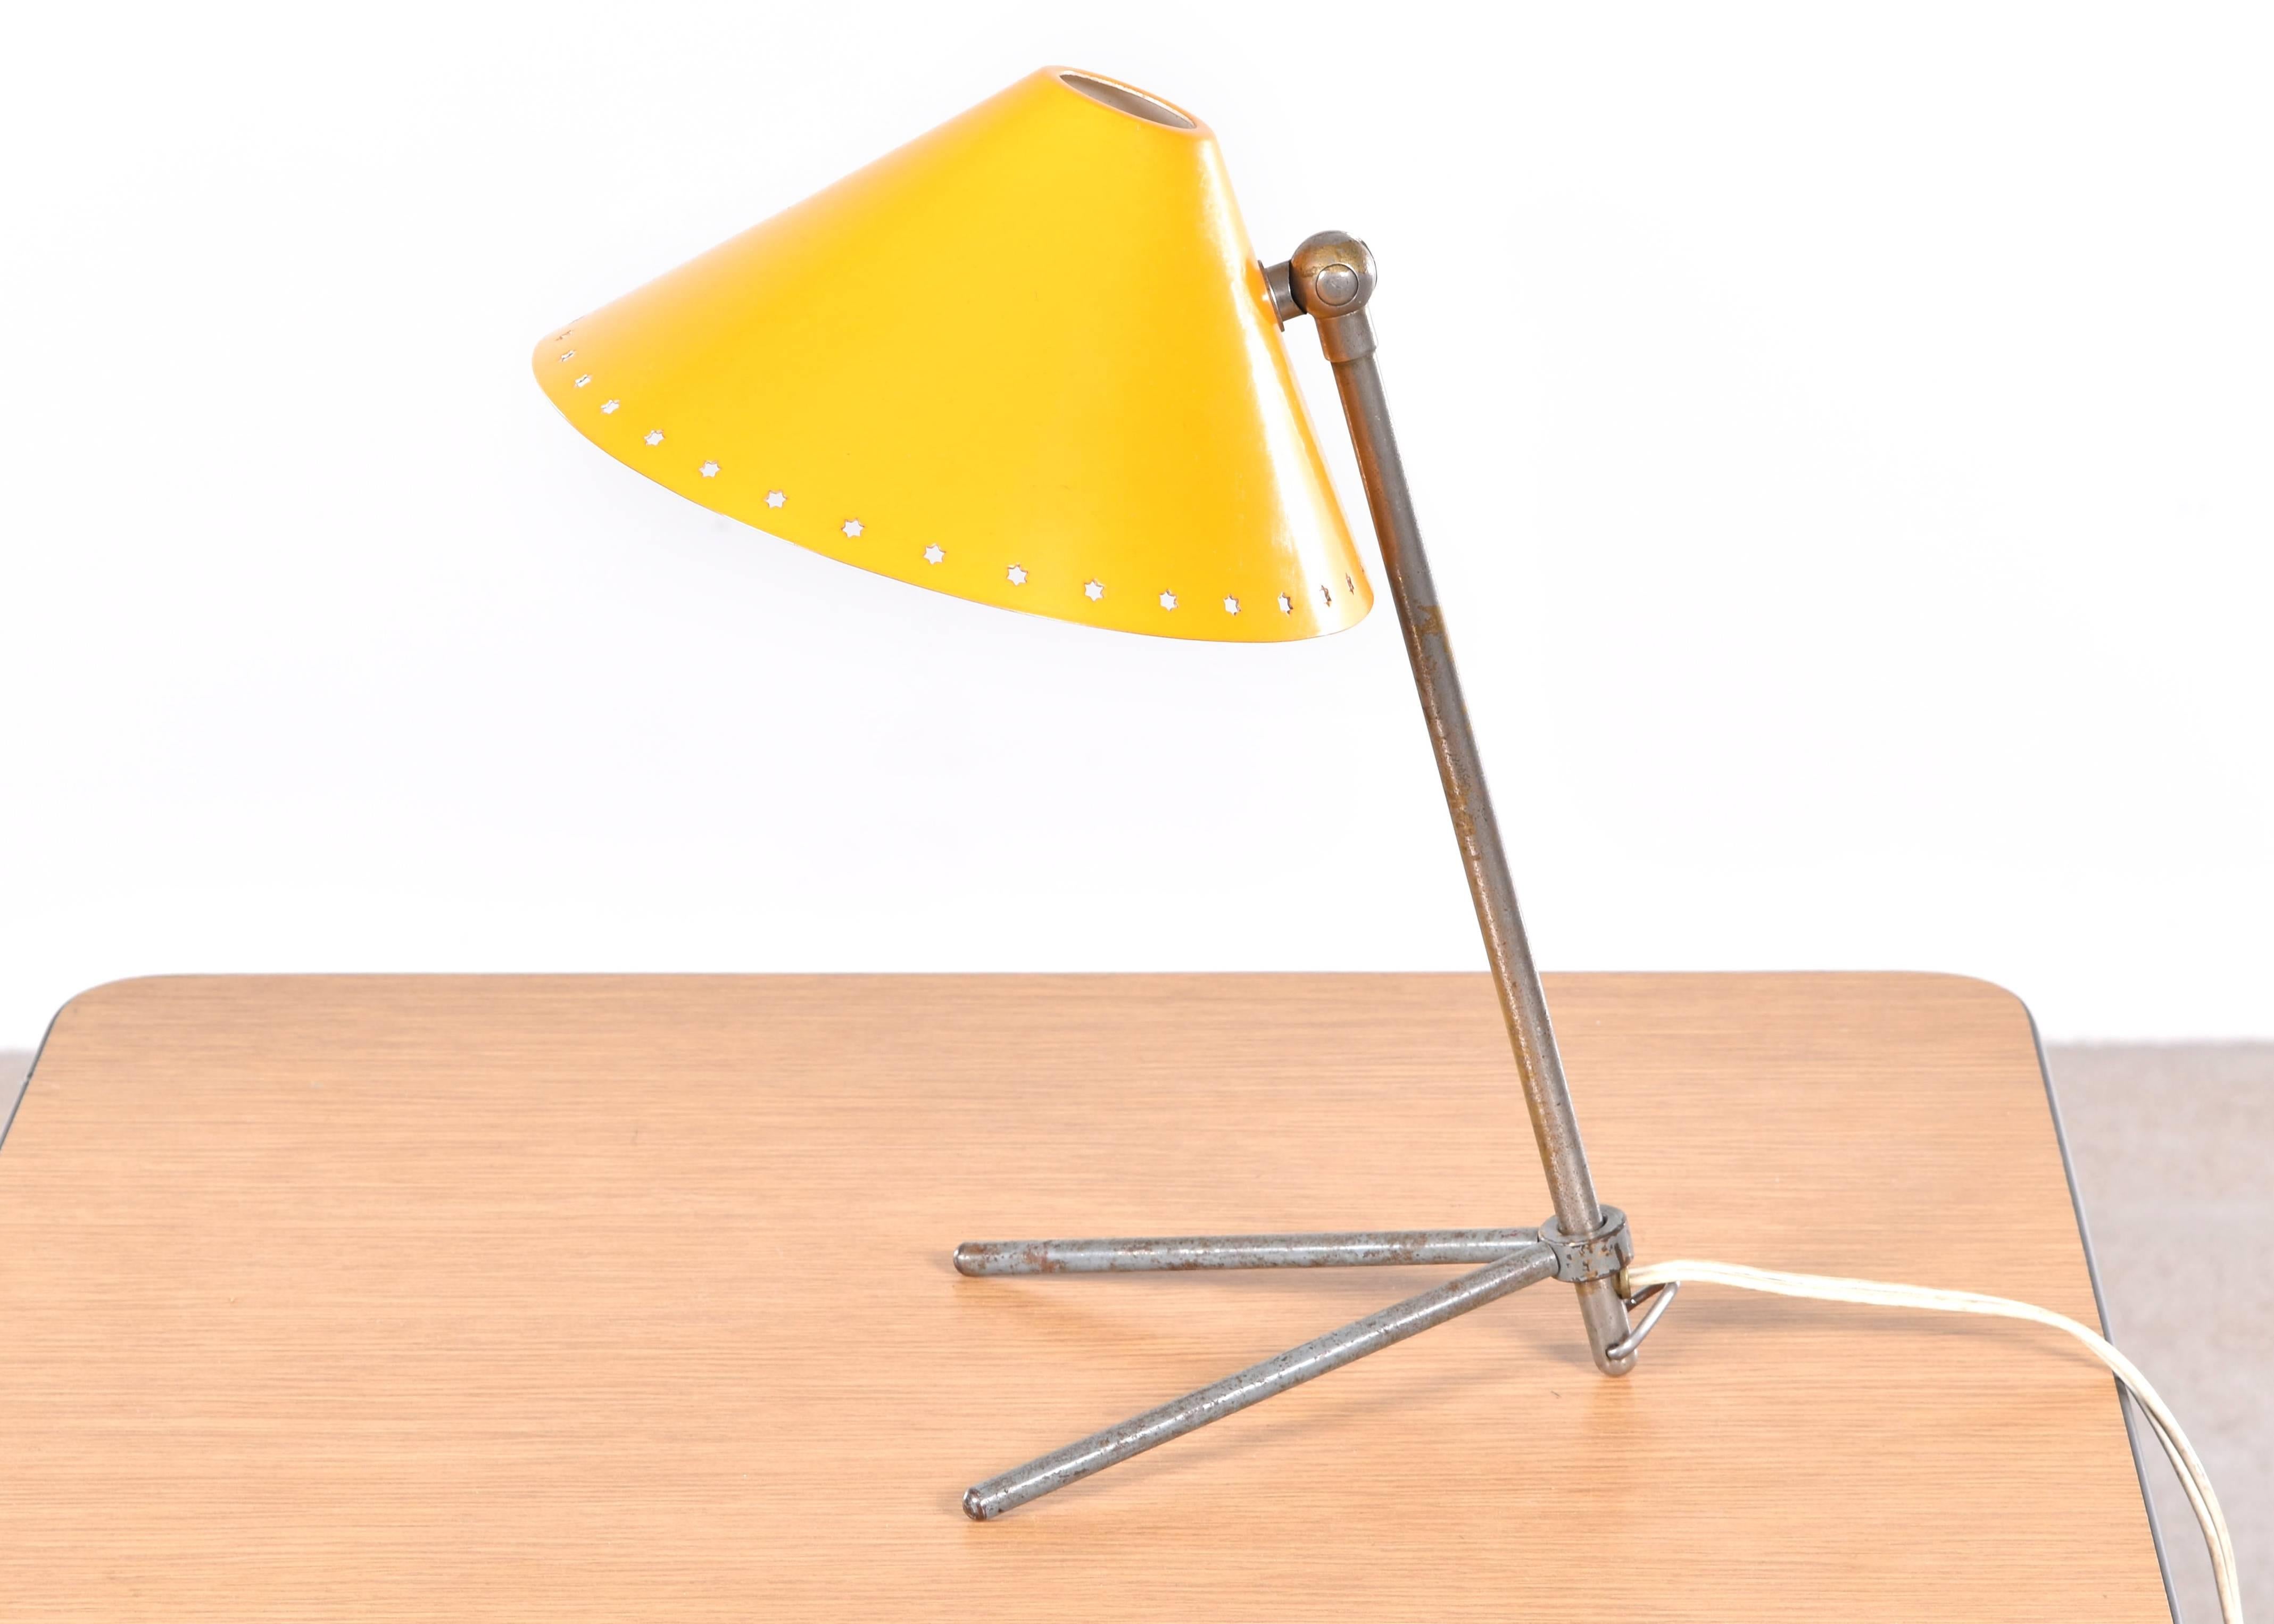 Elegant and stylish table or wall lamp for Dutch lighting company Hala. Tripod base adjustable in height and angle. Minimalistic, beautiful and well thought out designed lamp in very good original condition.